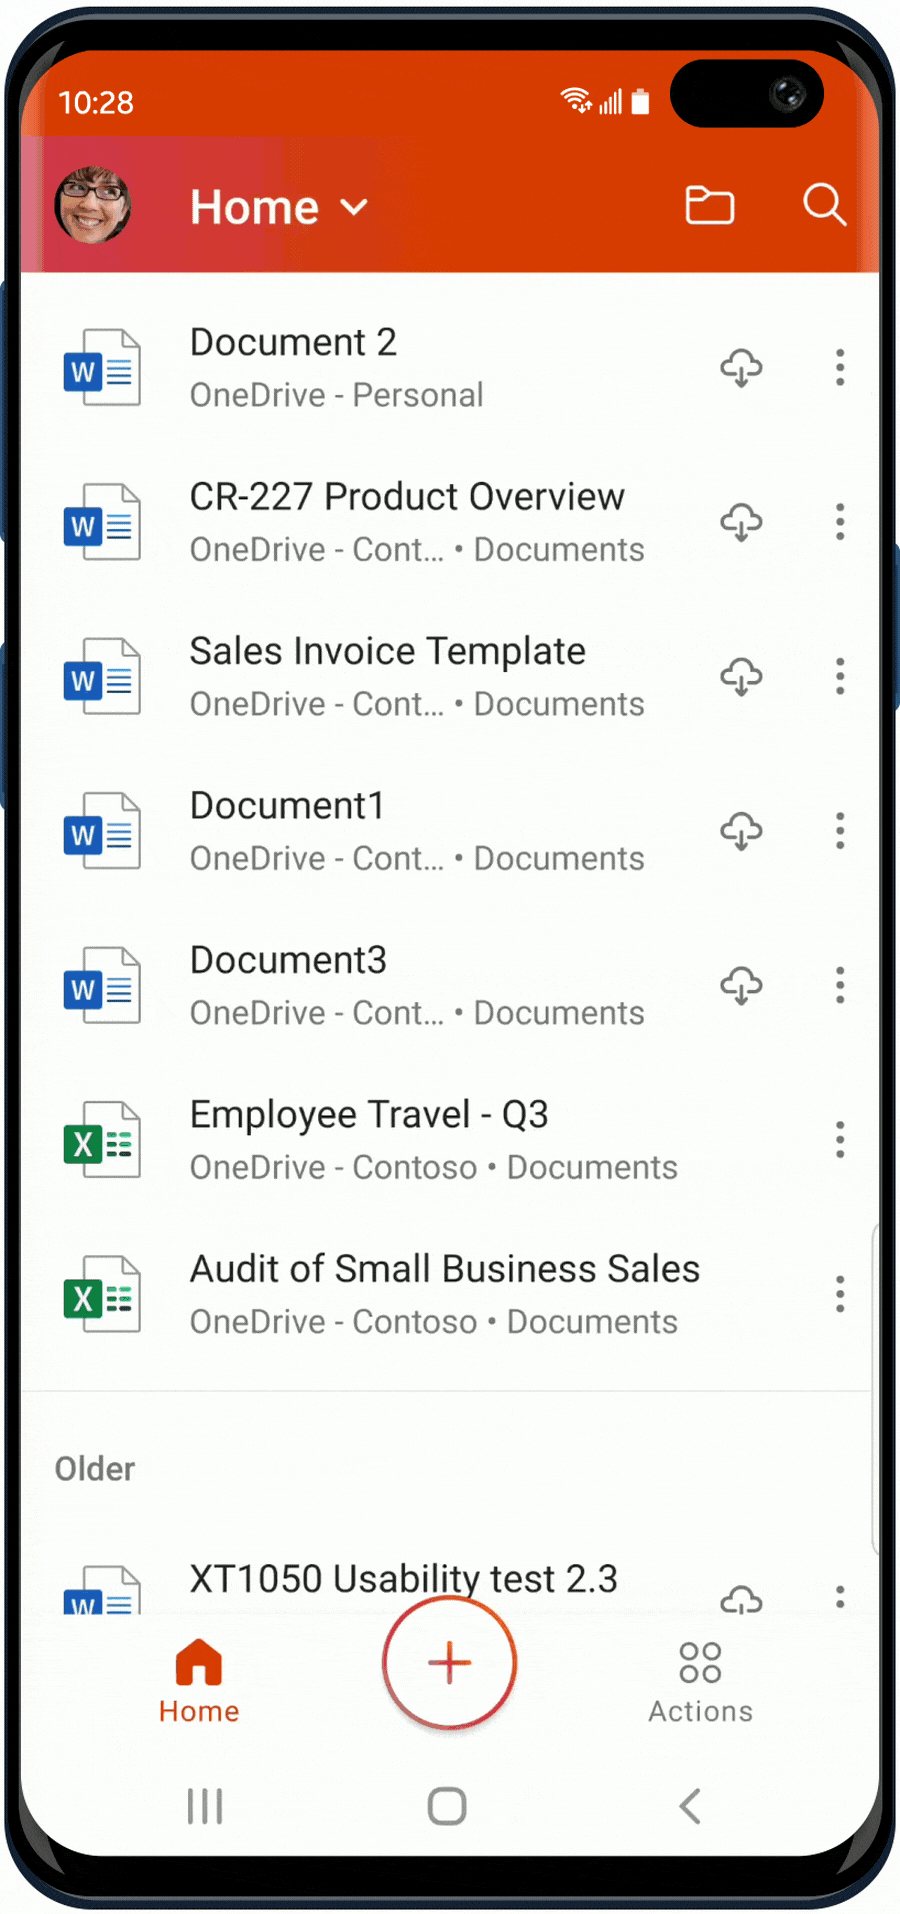 New Office mobile app now generally available for Android and iOS The-new-Office-app-now-generally-available-for-Android-and-iOS-GIF-2.gif